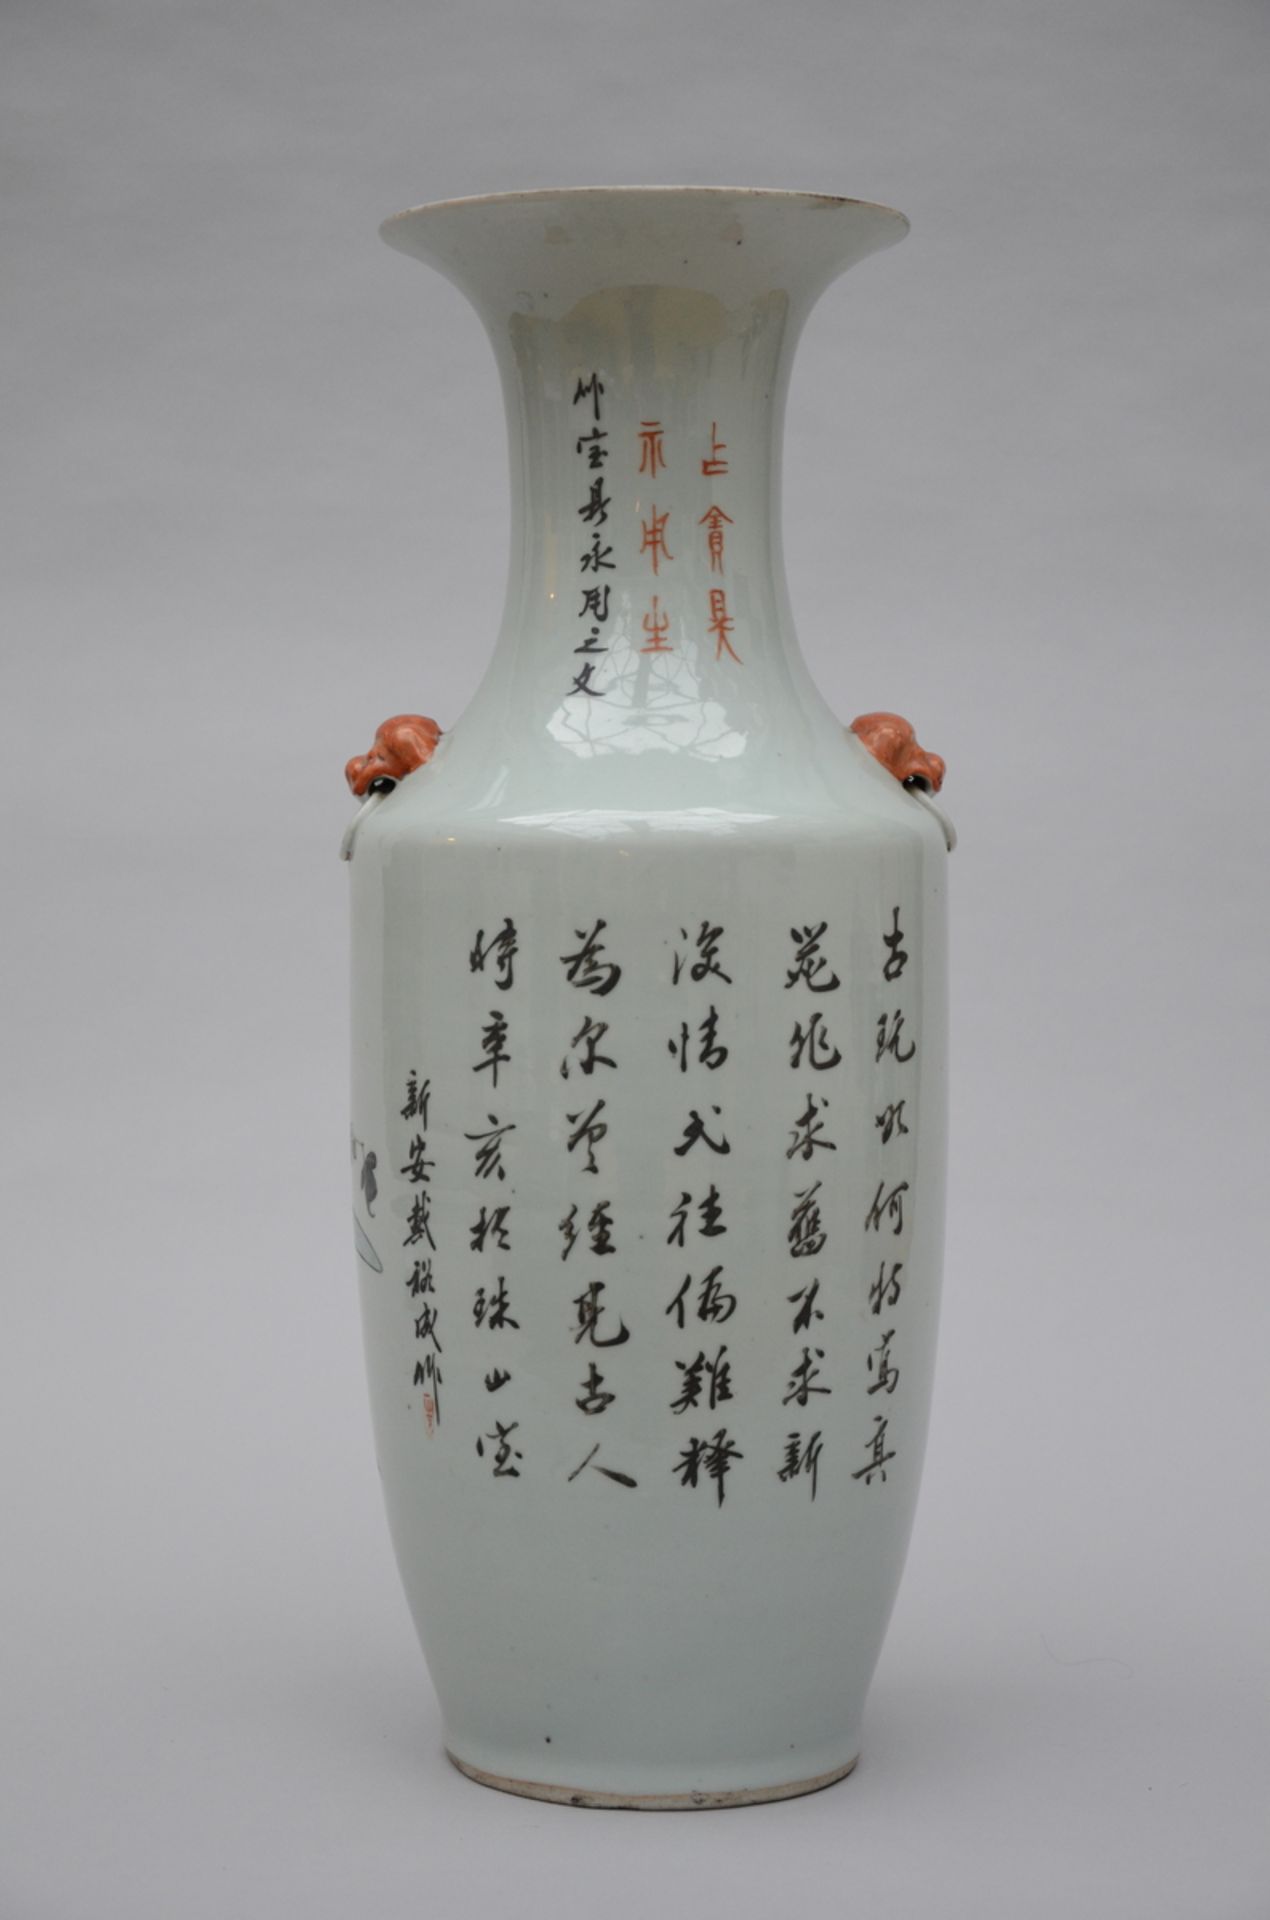 Chinese porcelain vase 'antiquities' (h60 cm) - Image 2 of 3